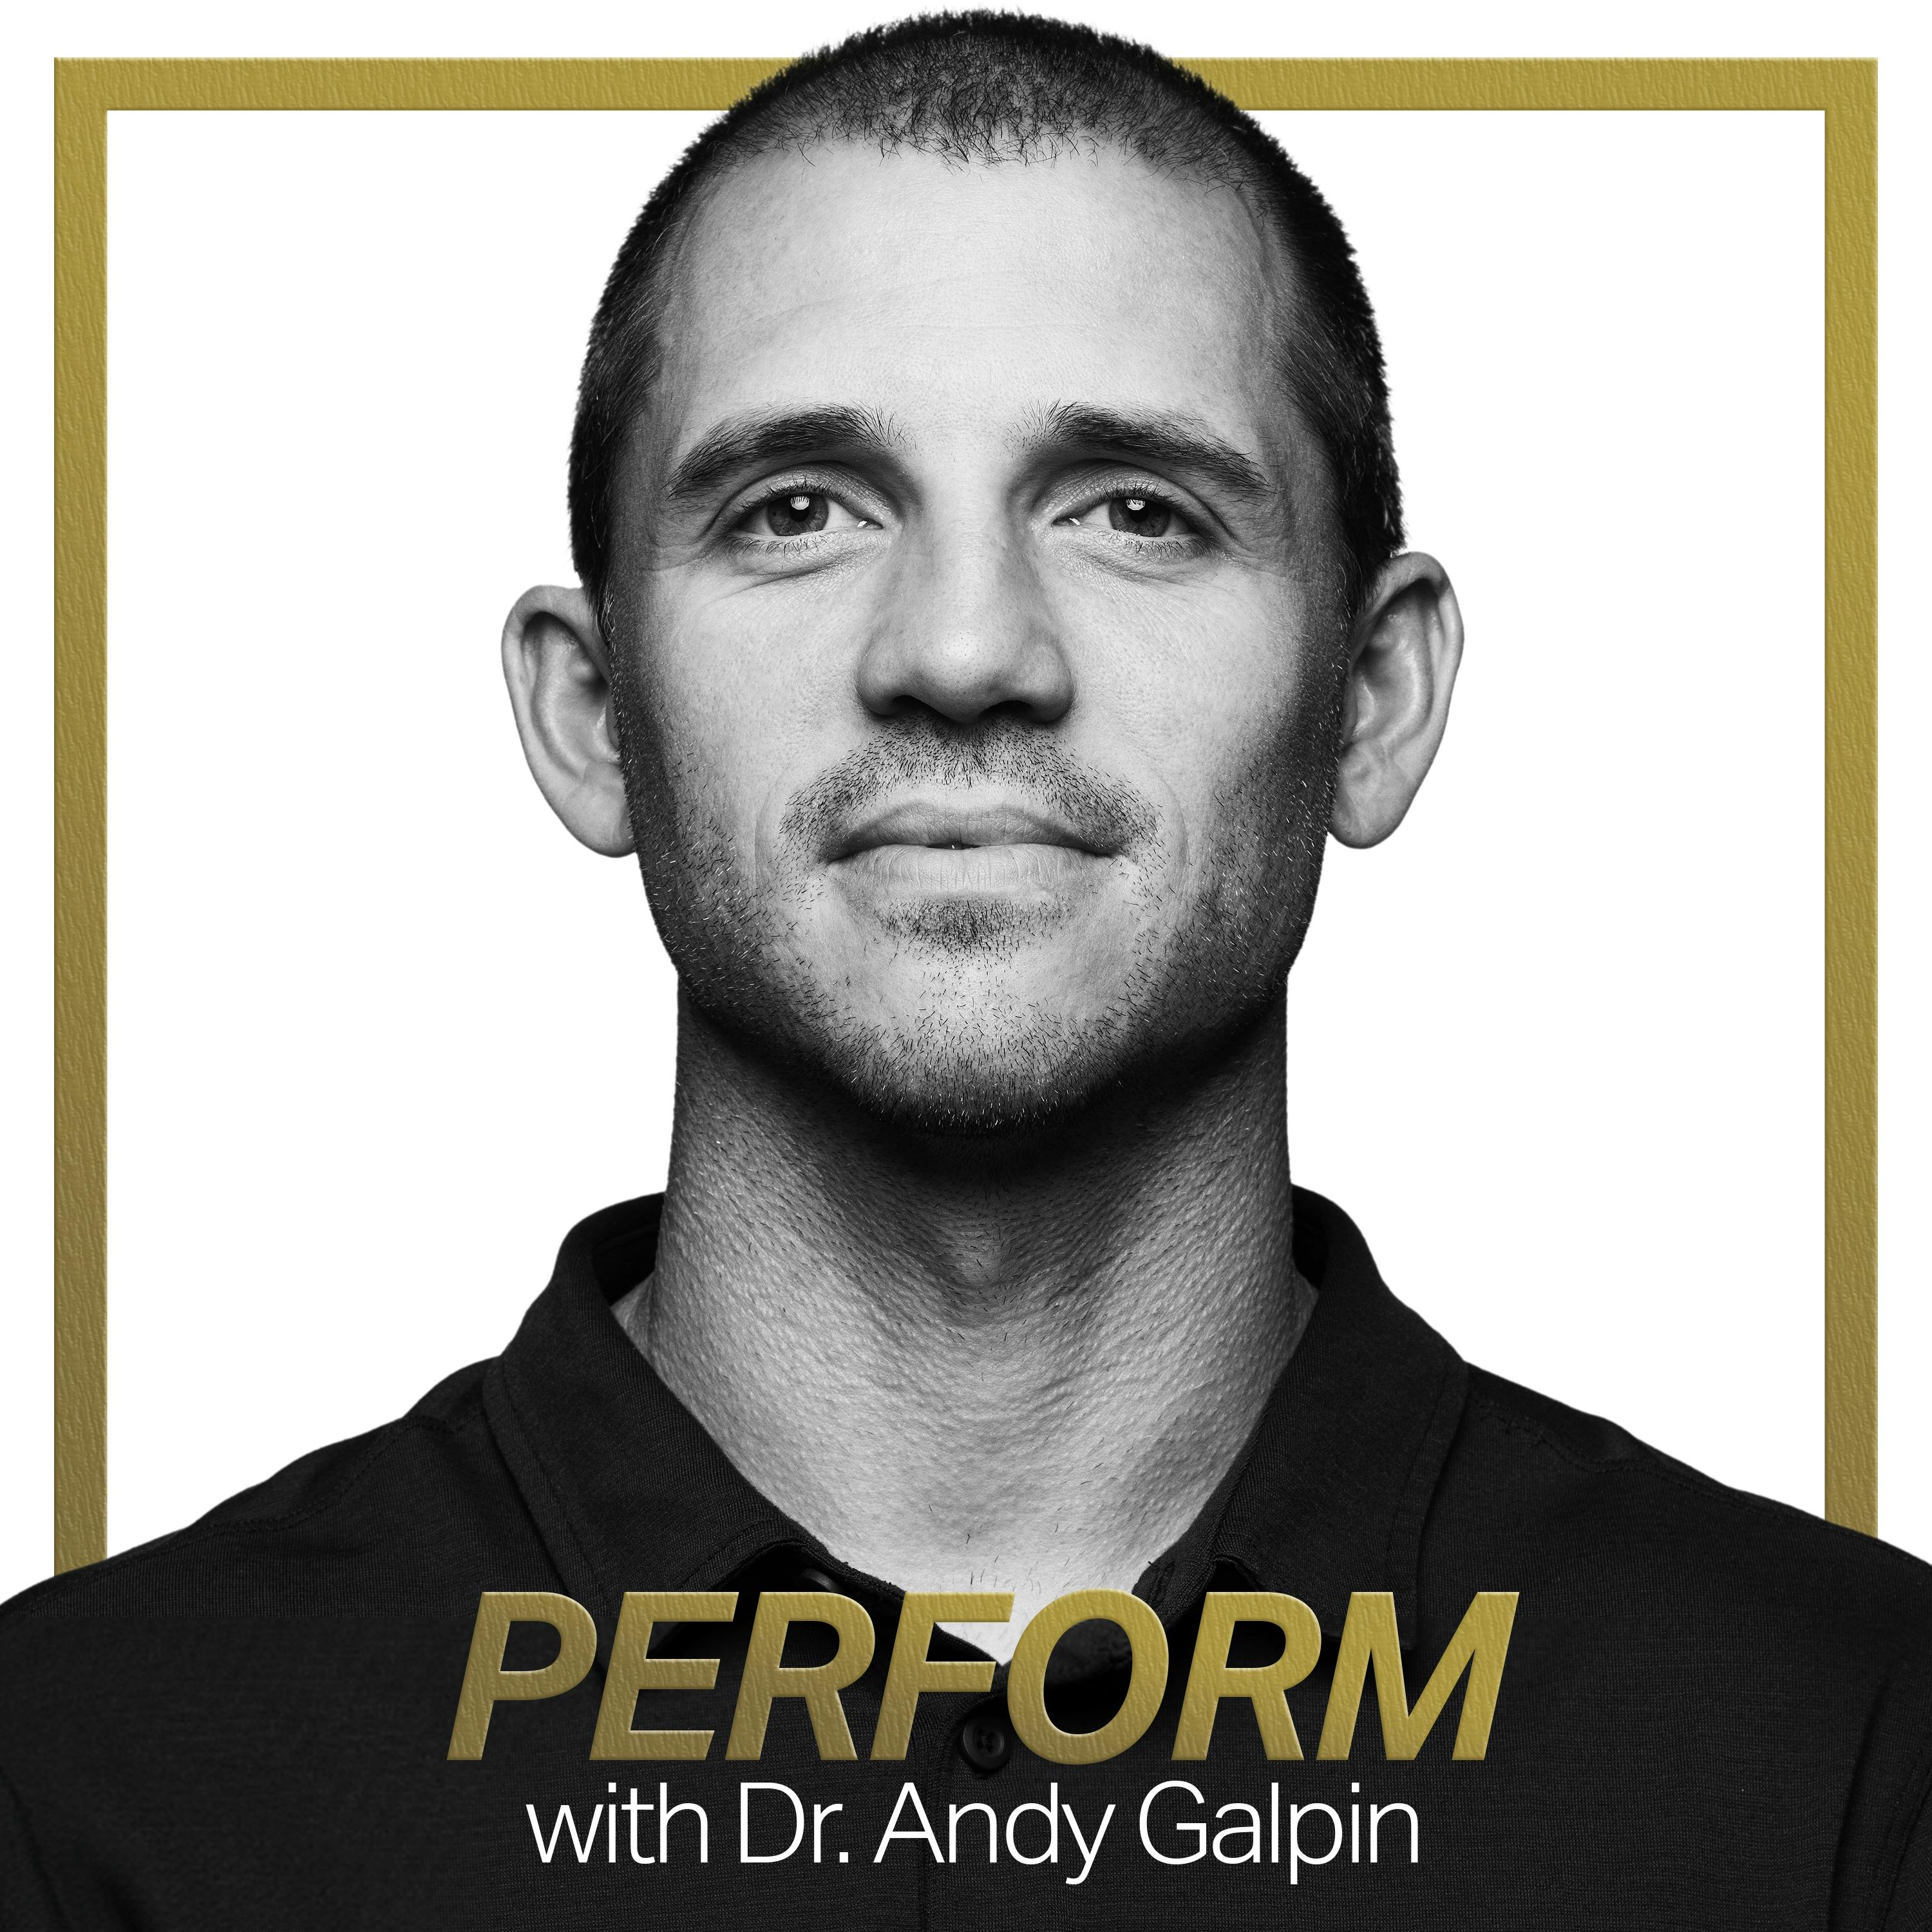 Andy Galpin Realized the Heart Is Just as Important as Skeletal Muscle